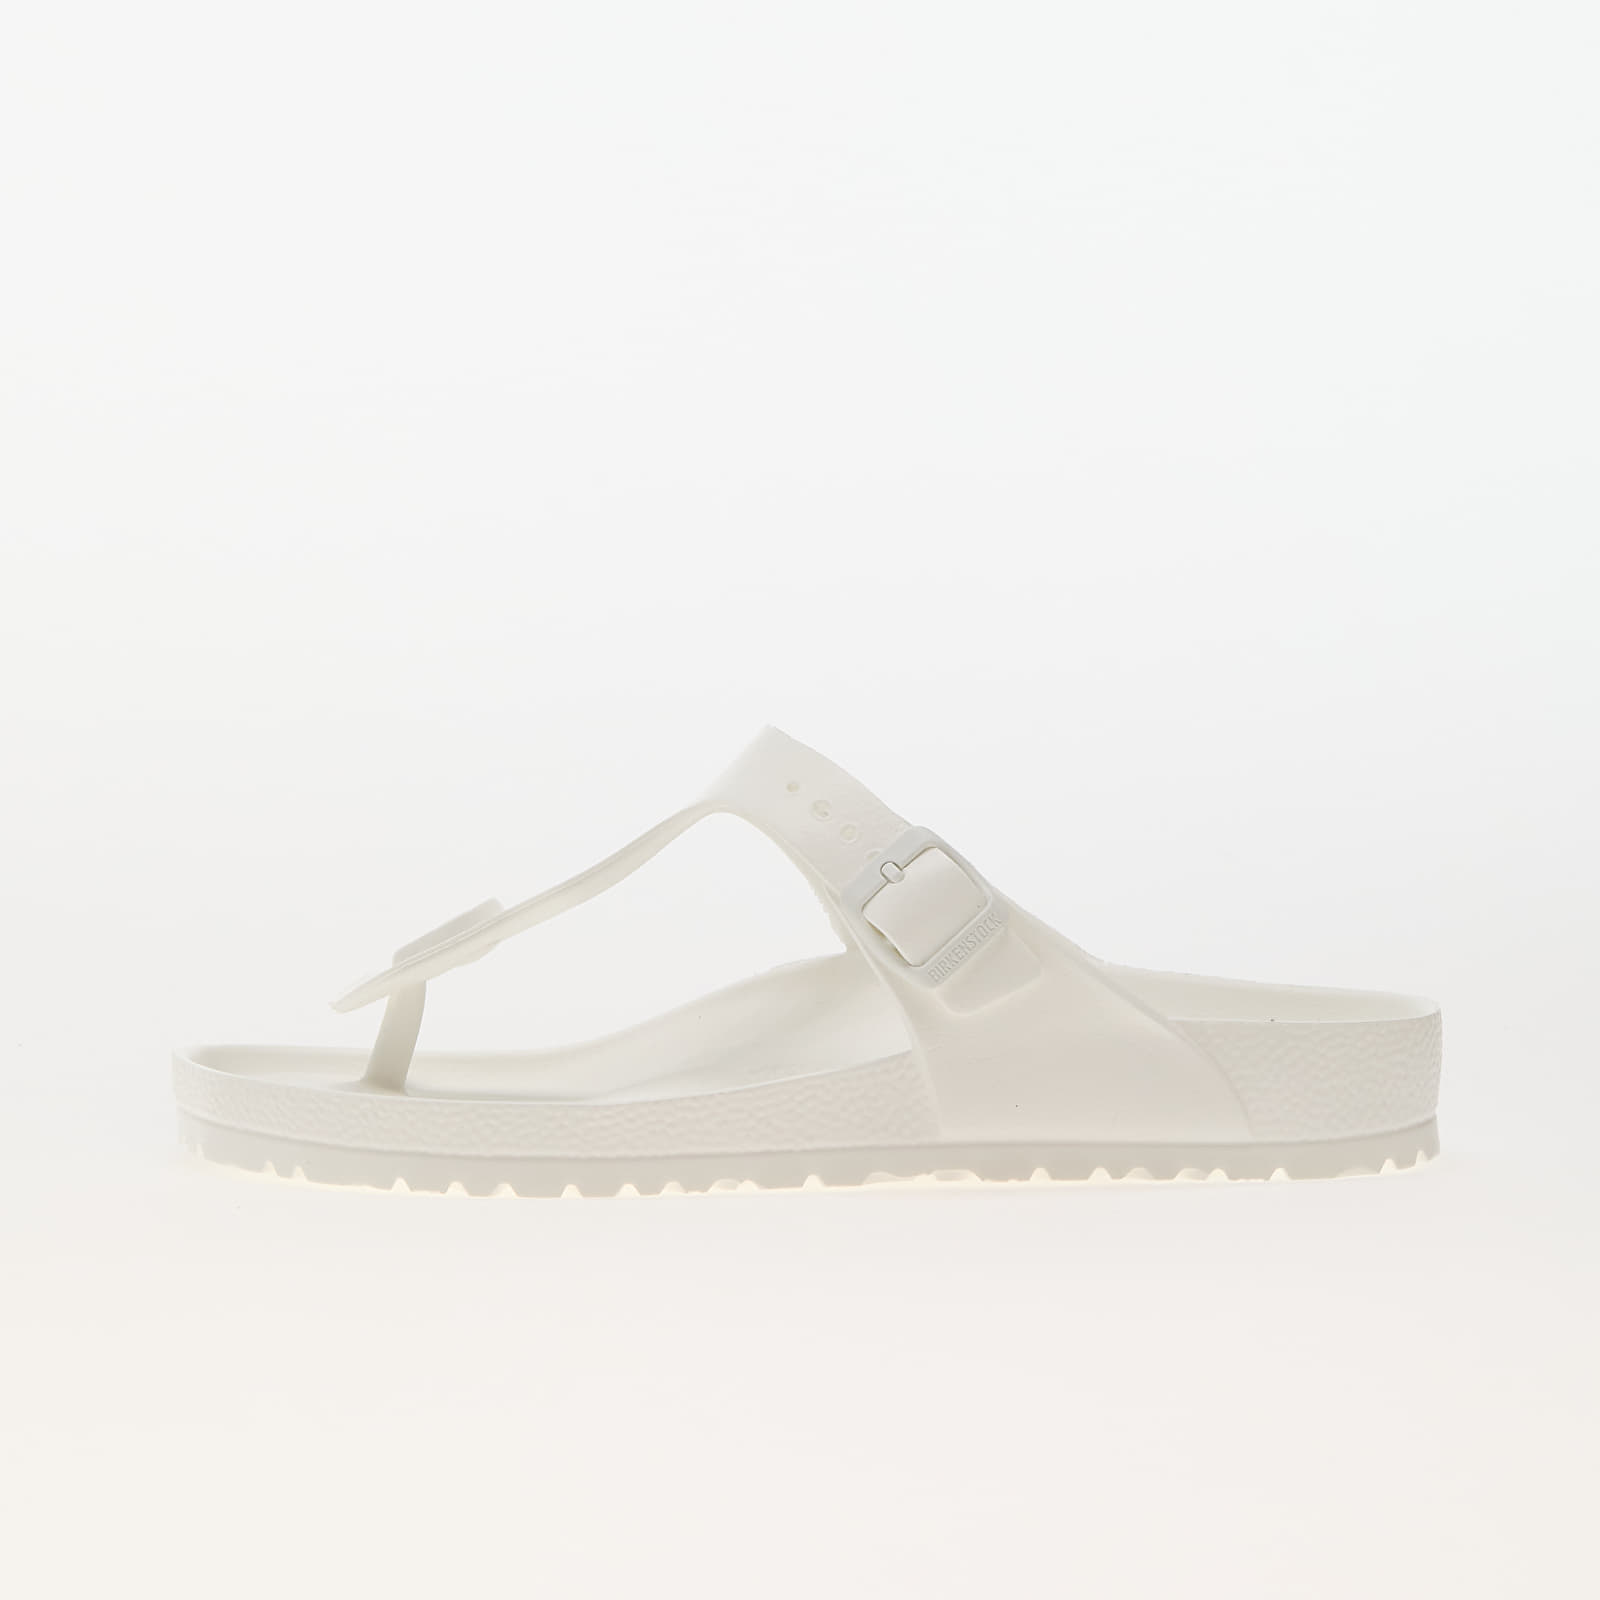 Women's sneakers and shoes Birkenstock Gizeh Eva white